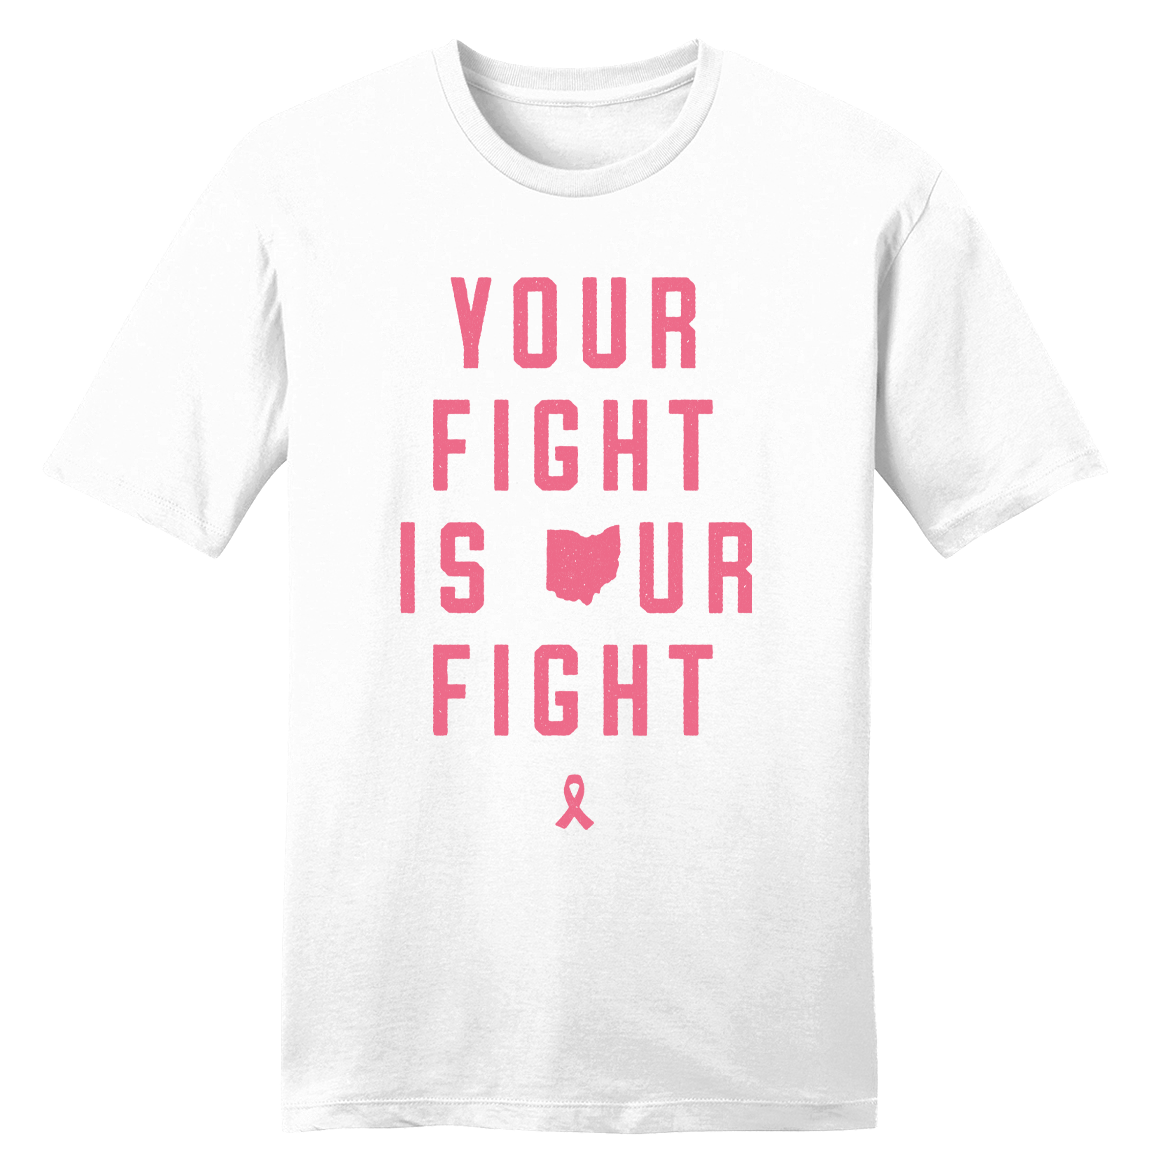 Your Fight is Our Fight - Cincy Shirts